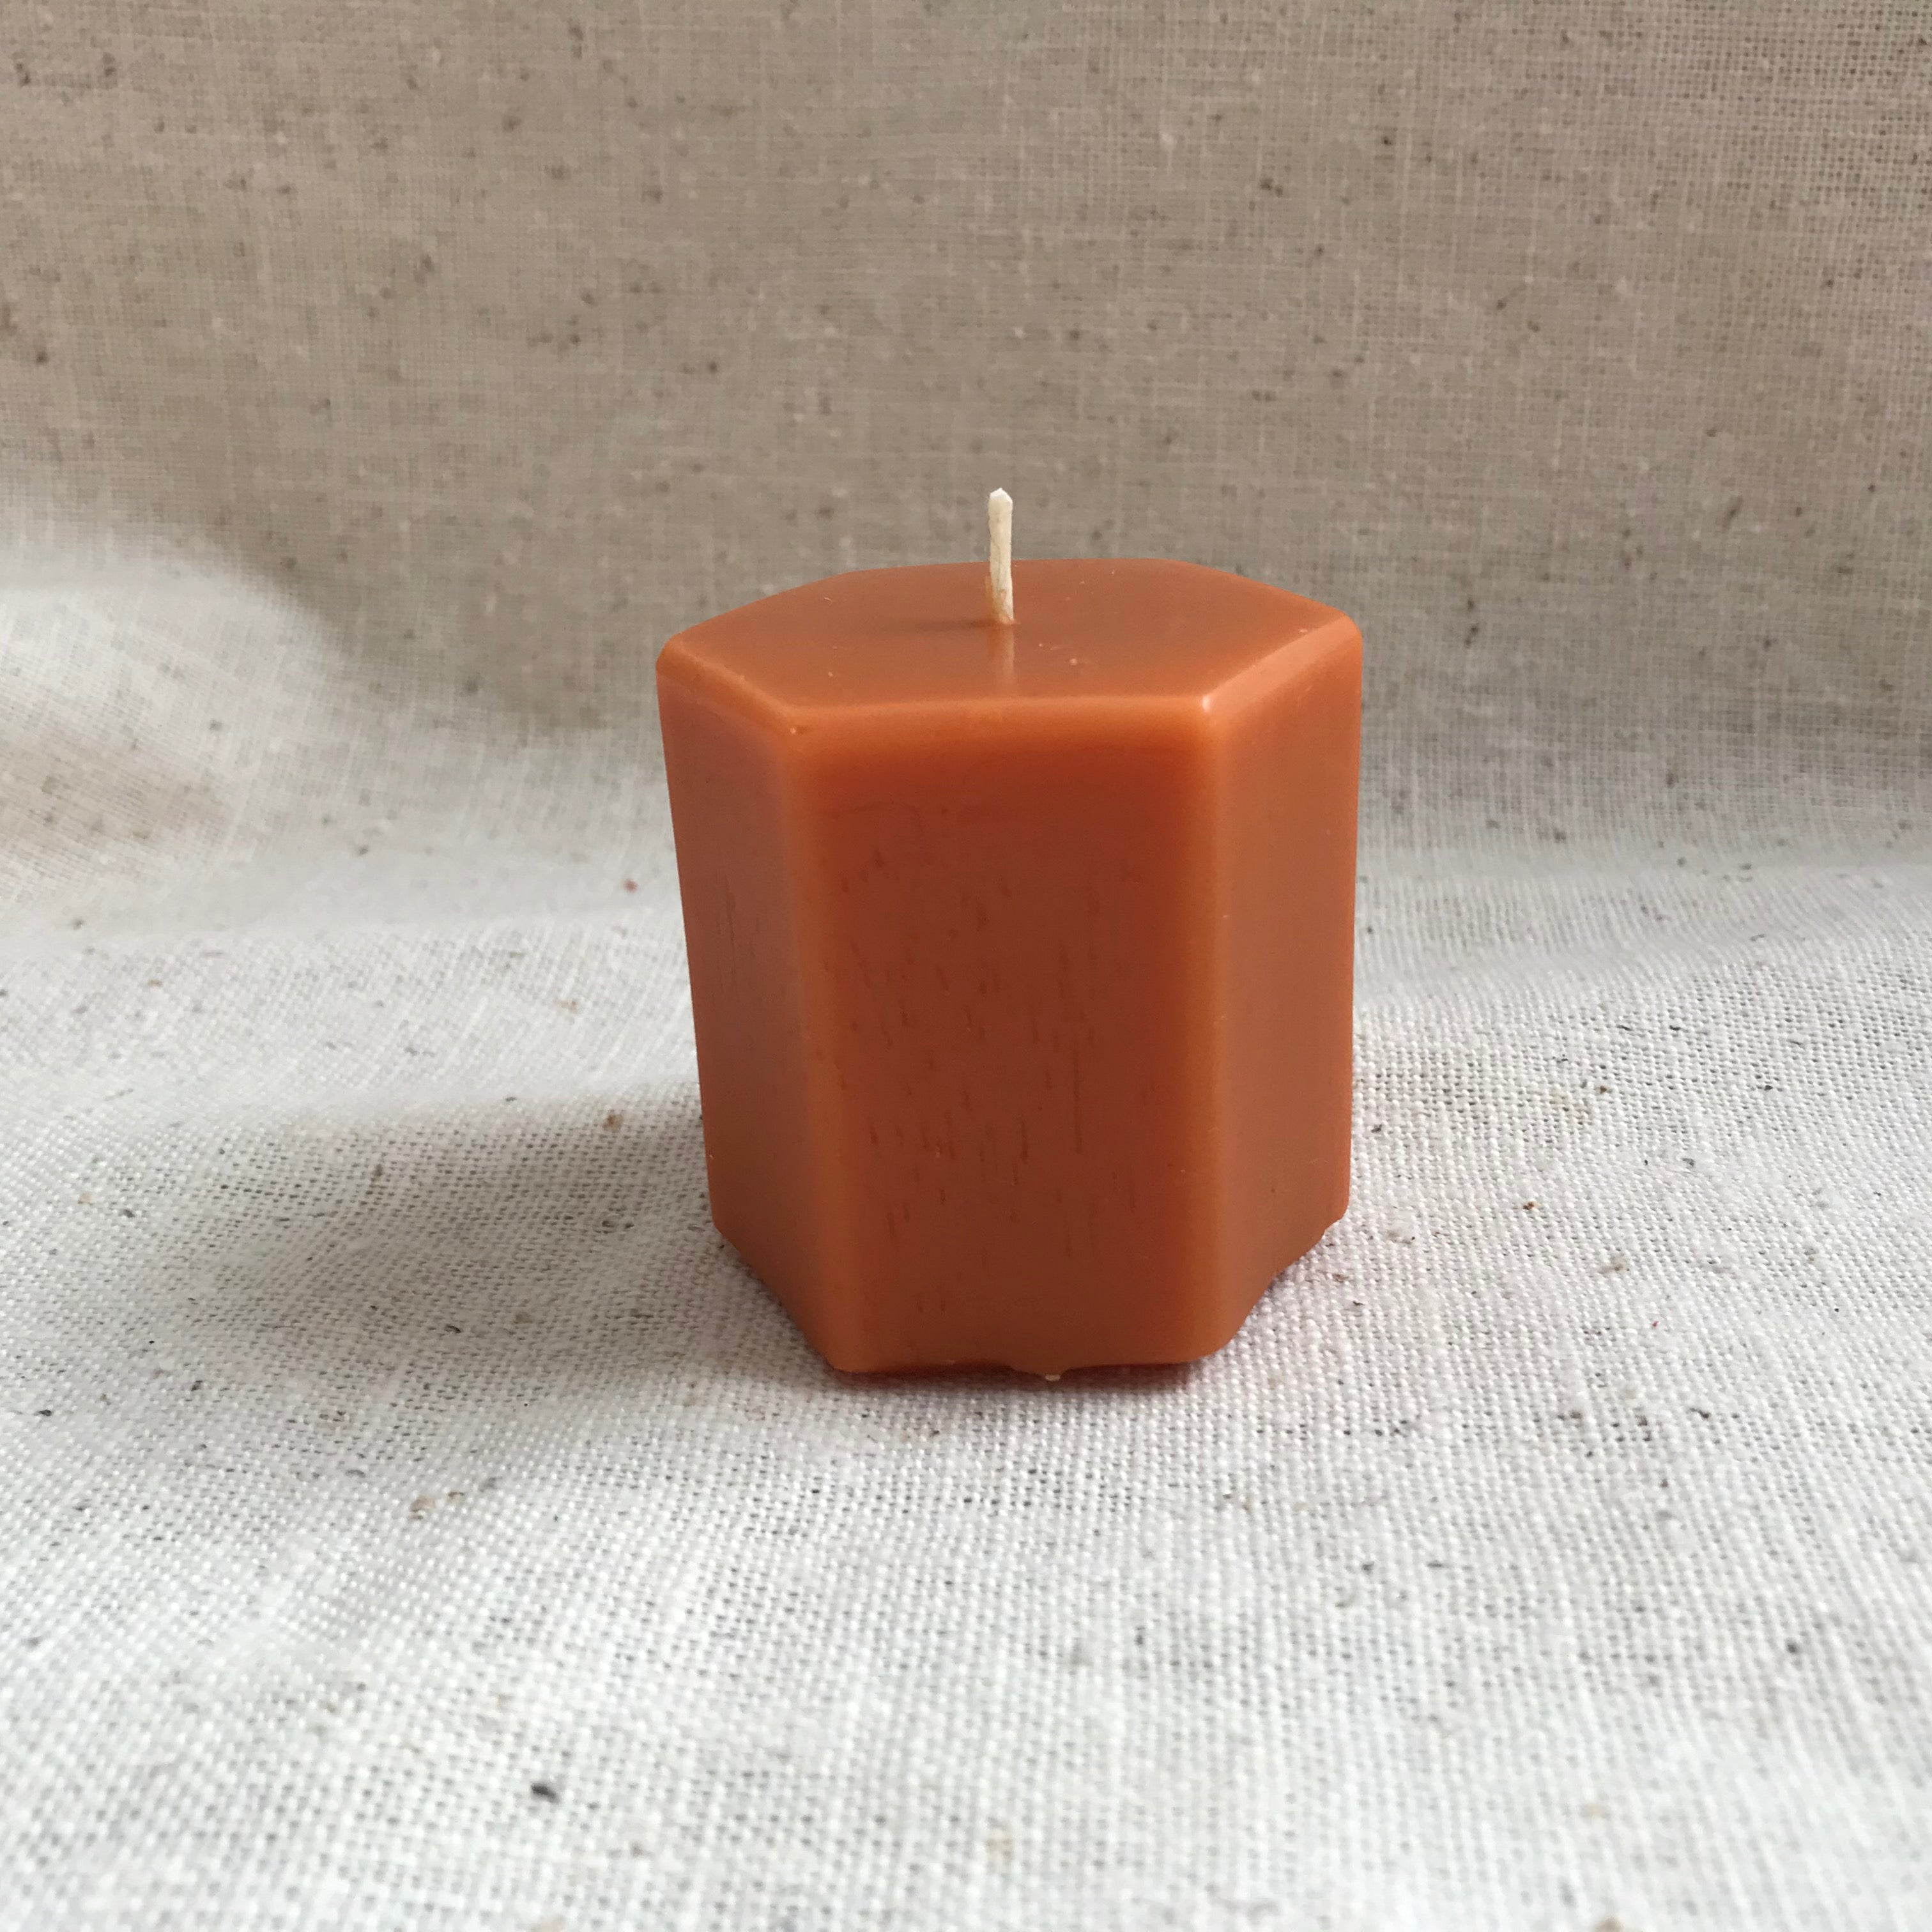 Hexie Candle - 2 inches